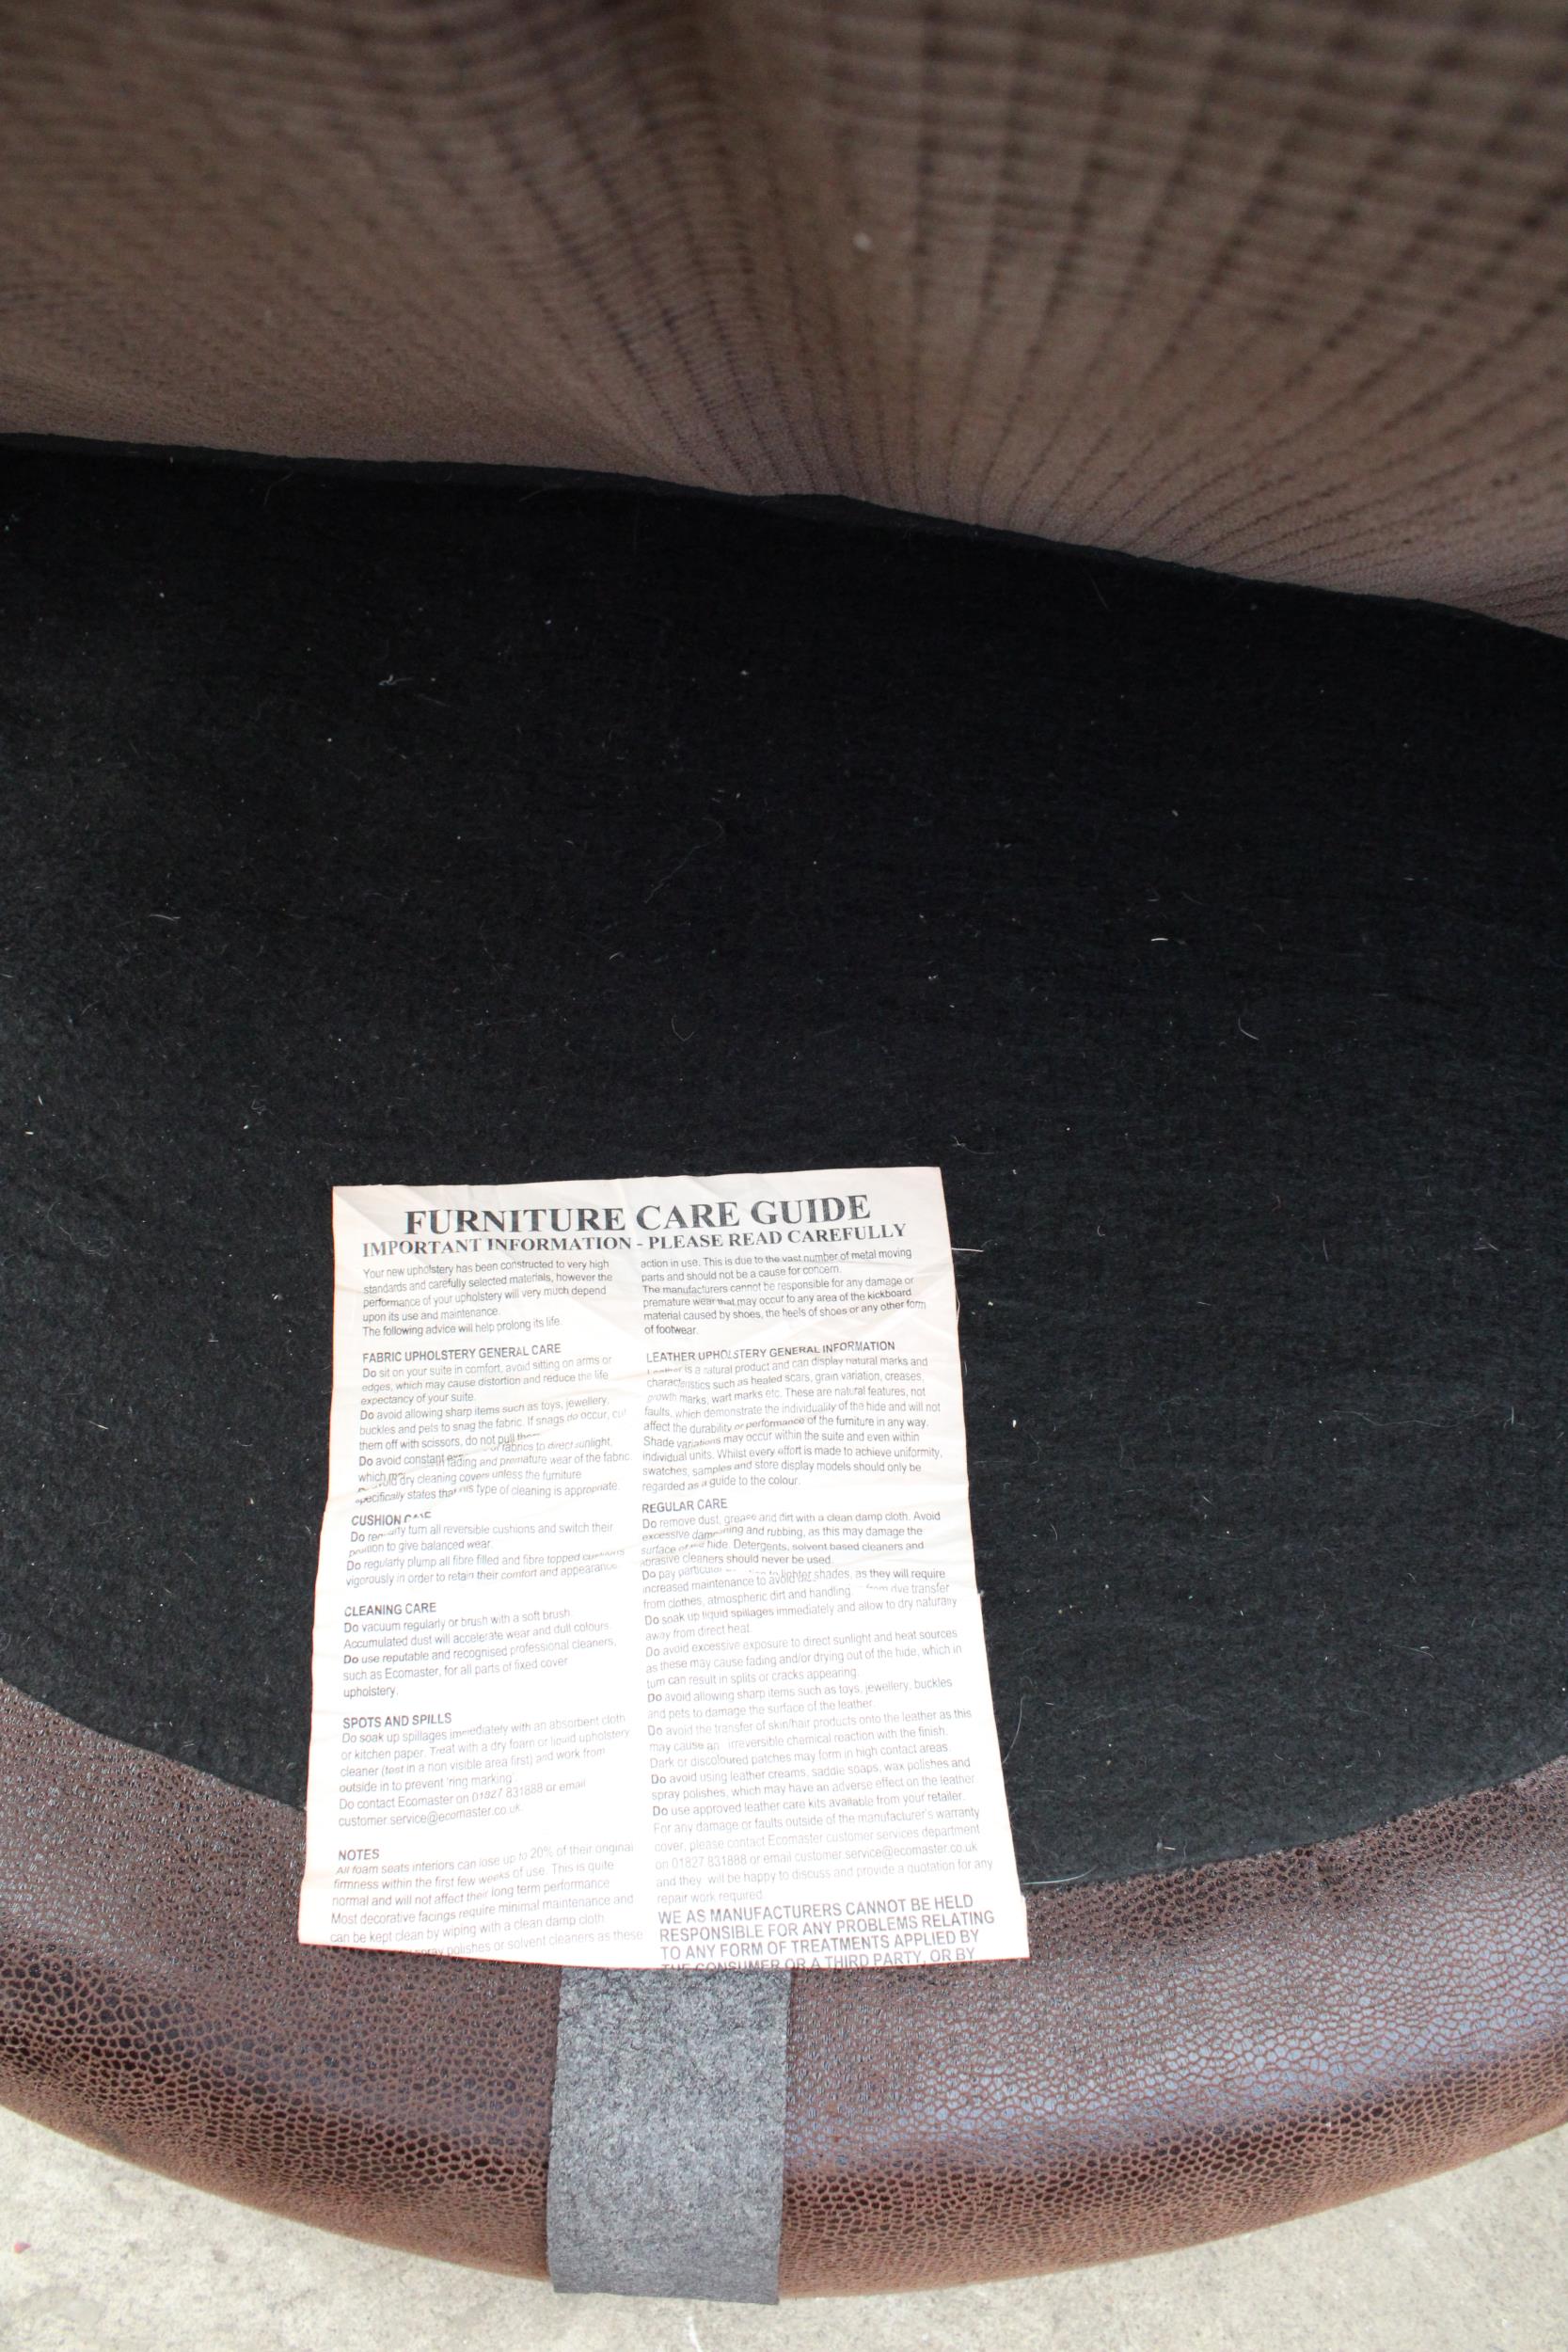 A BROWN LAURA ASHLEY SWIVEL SNUGGLE CHAIR - Image 3 of 3